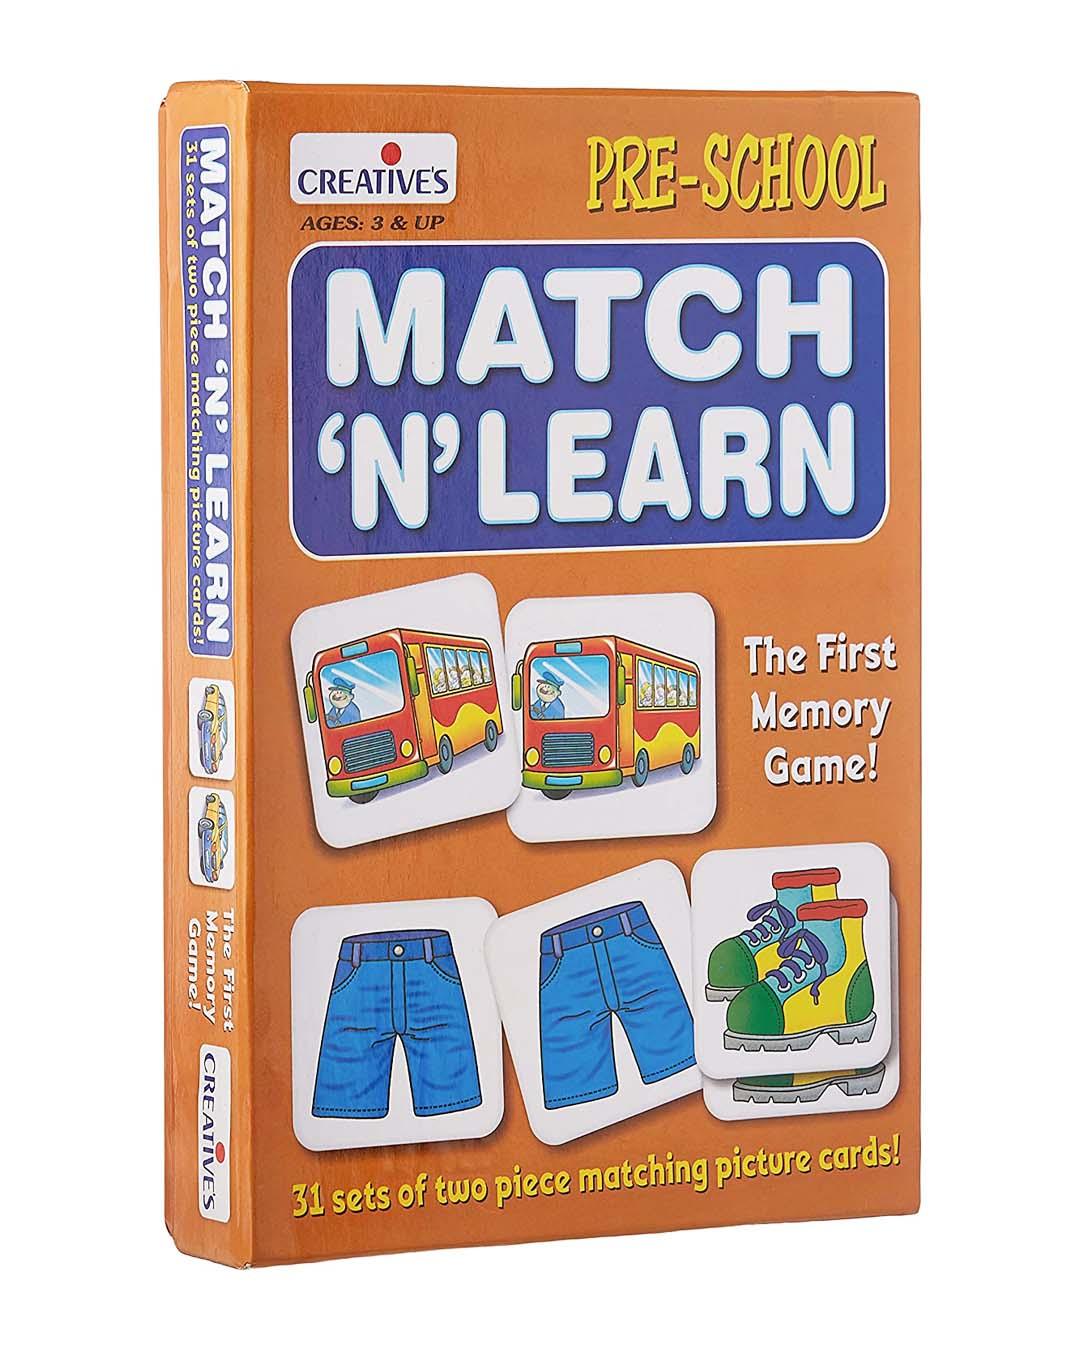 Creative Match N Learn (A First Memory Game) For Pre-School Kid - For Child Age 4 & Up - MARKET 99